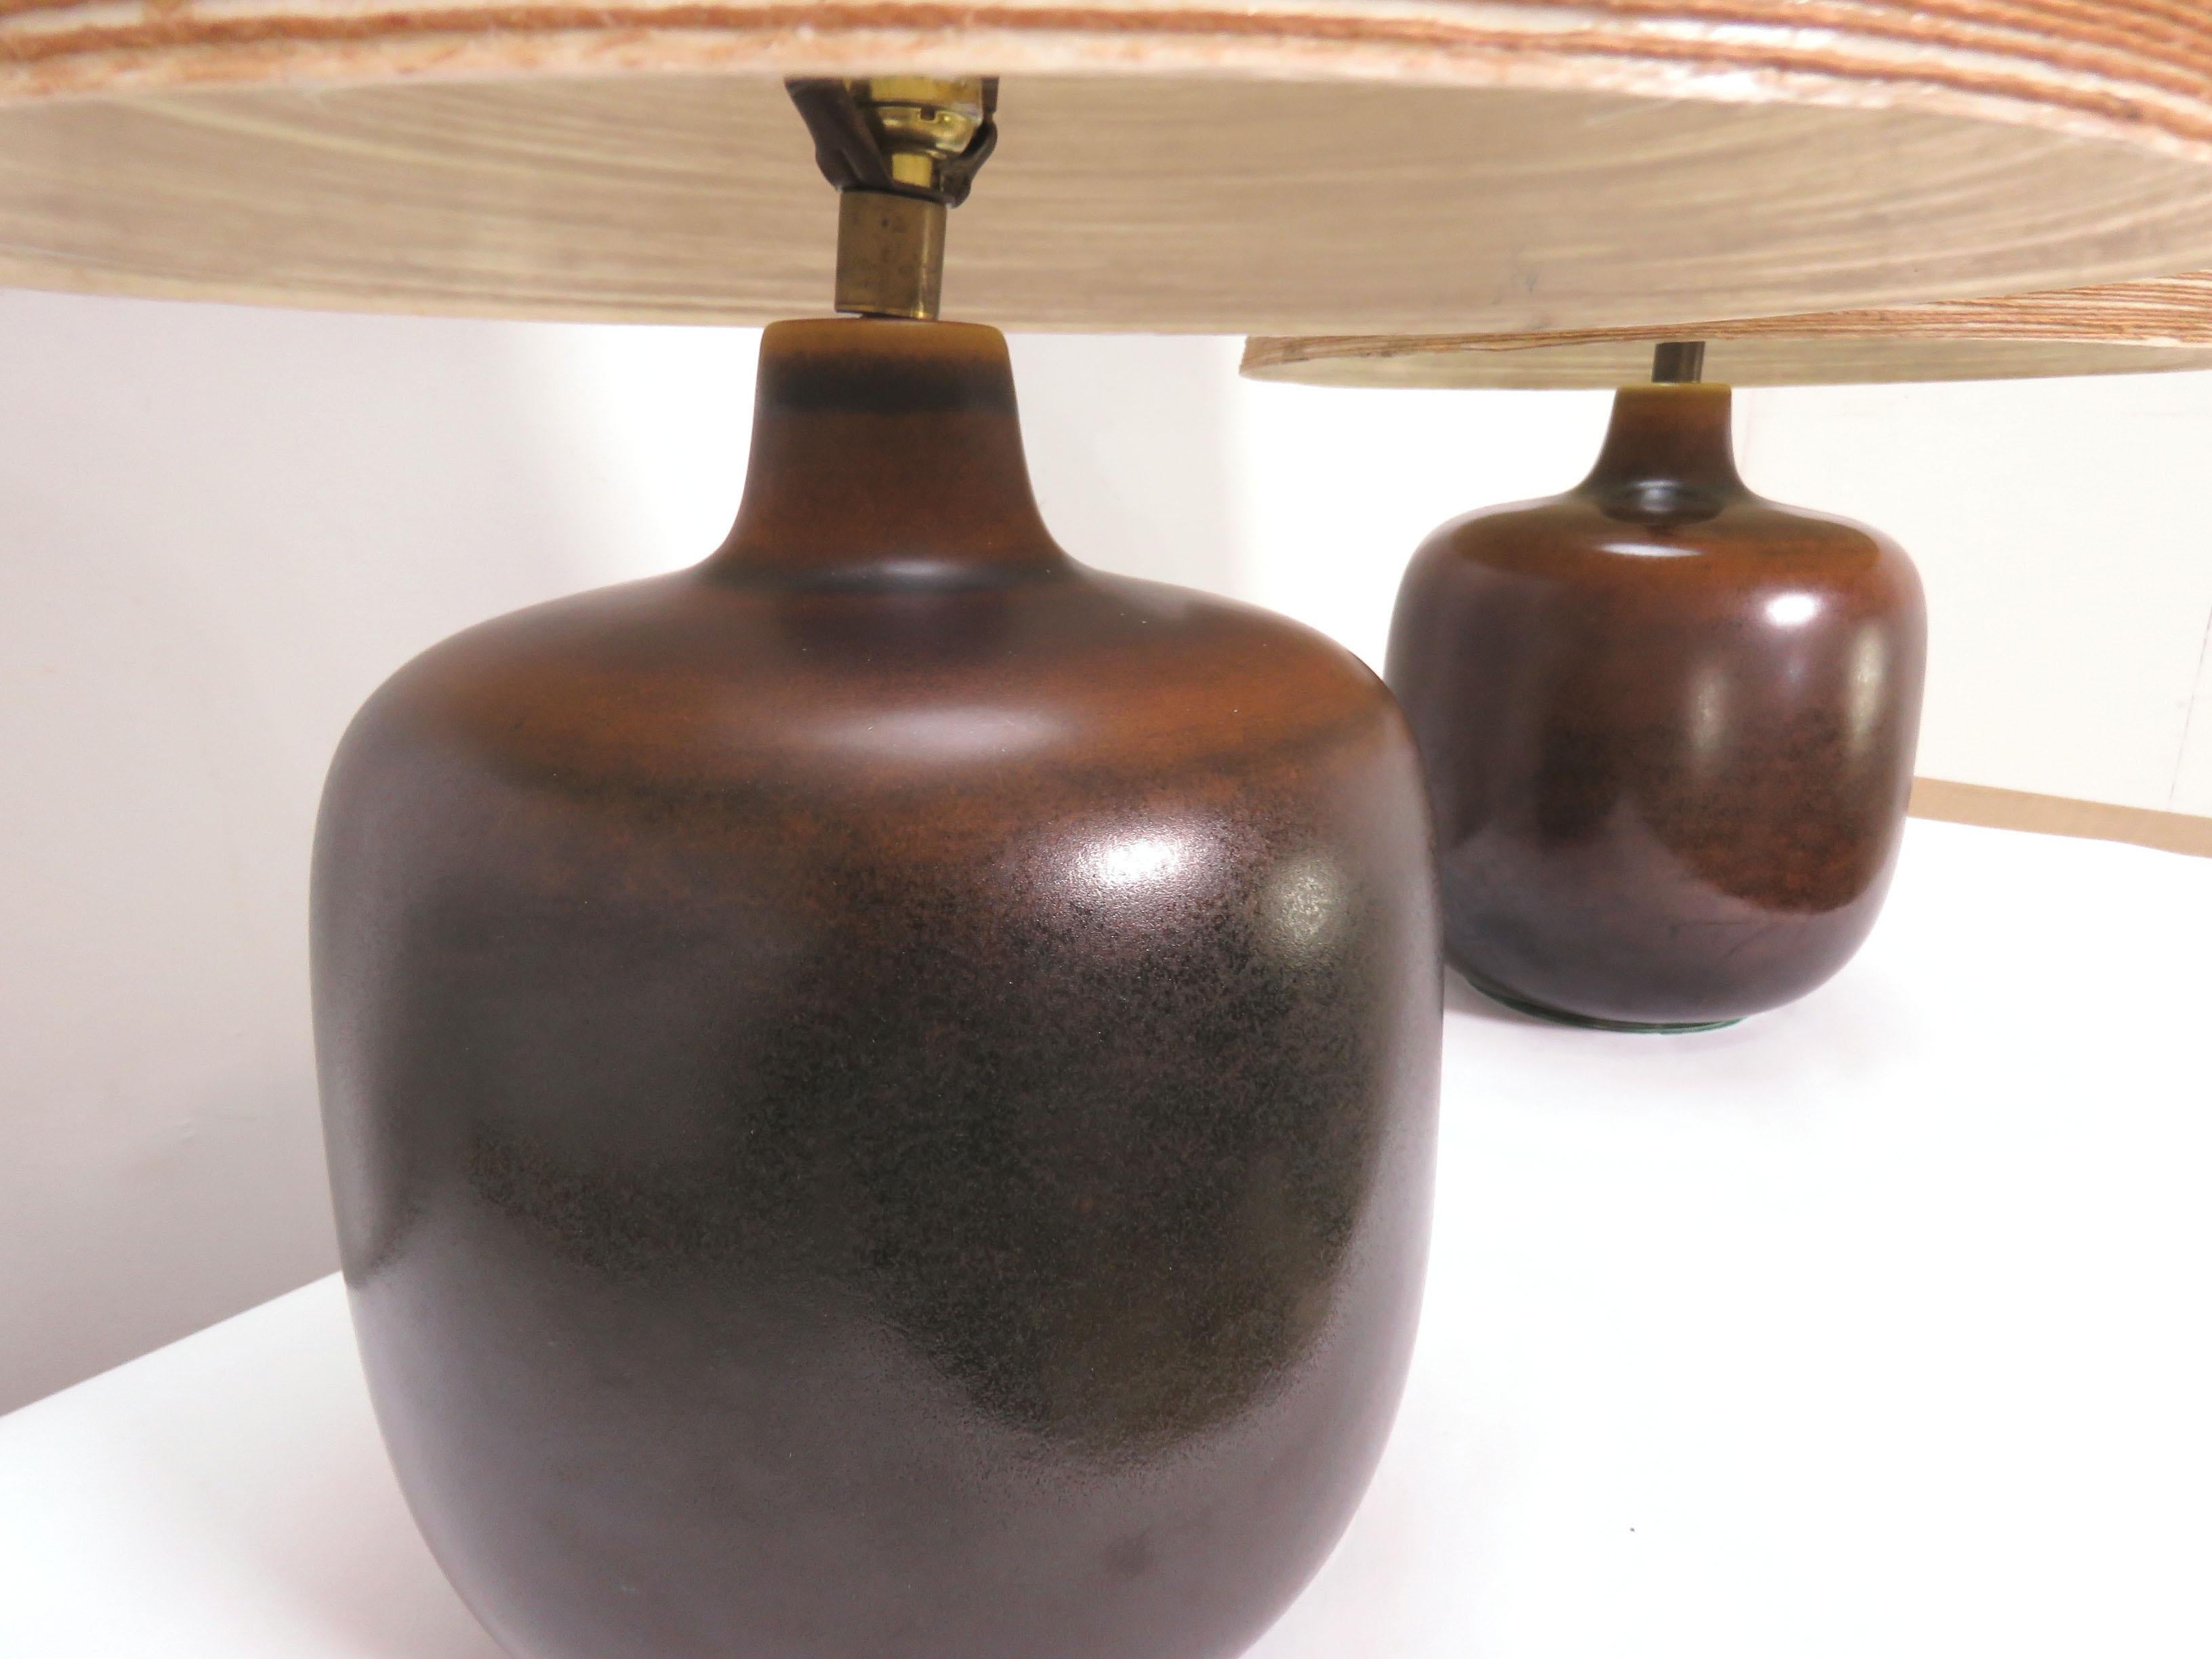 American Pair of Lotte & Gunnar Bostlund Art Pottery Table Lamps, circa 1970s